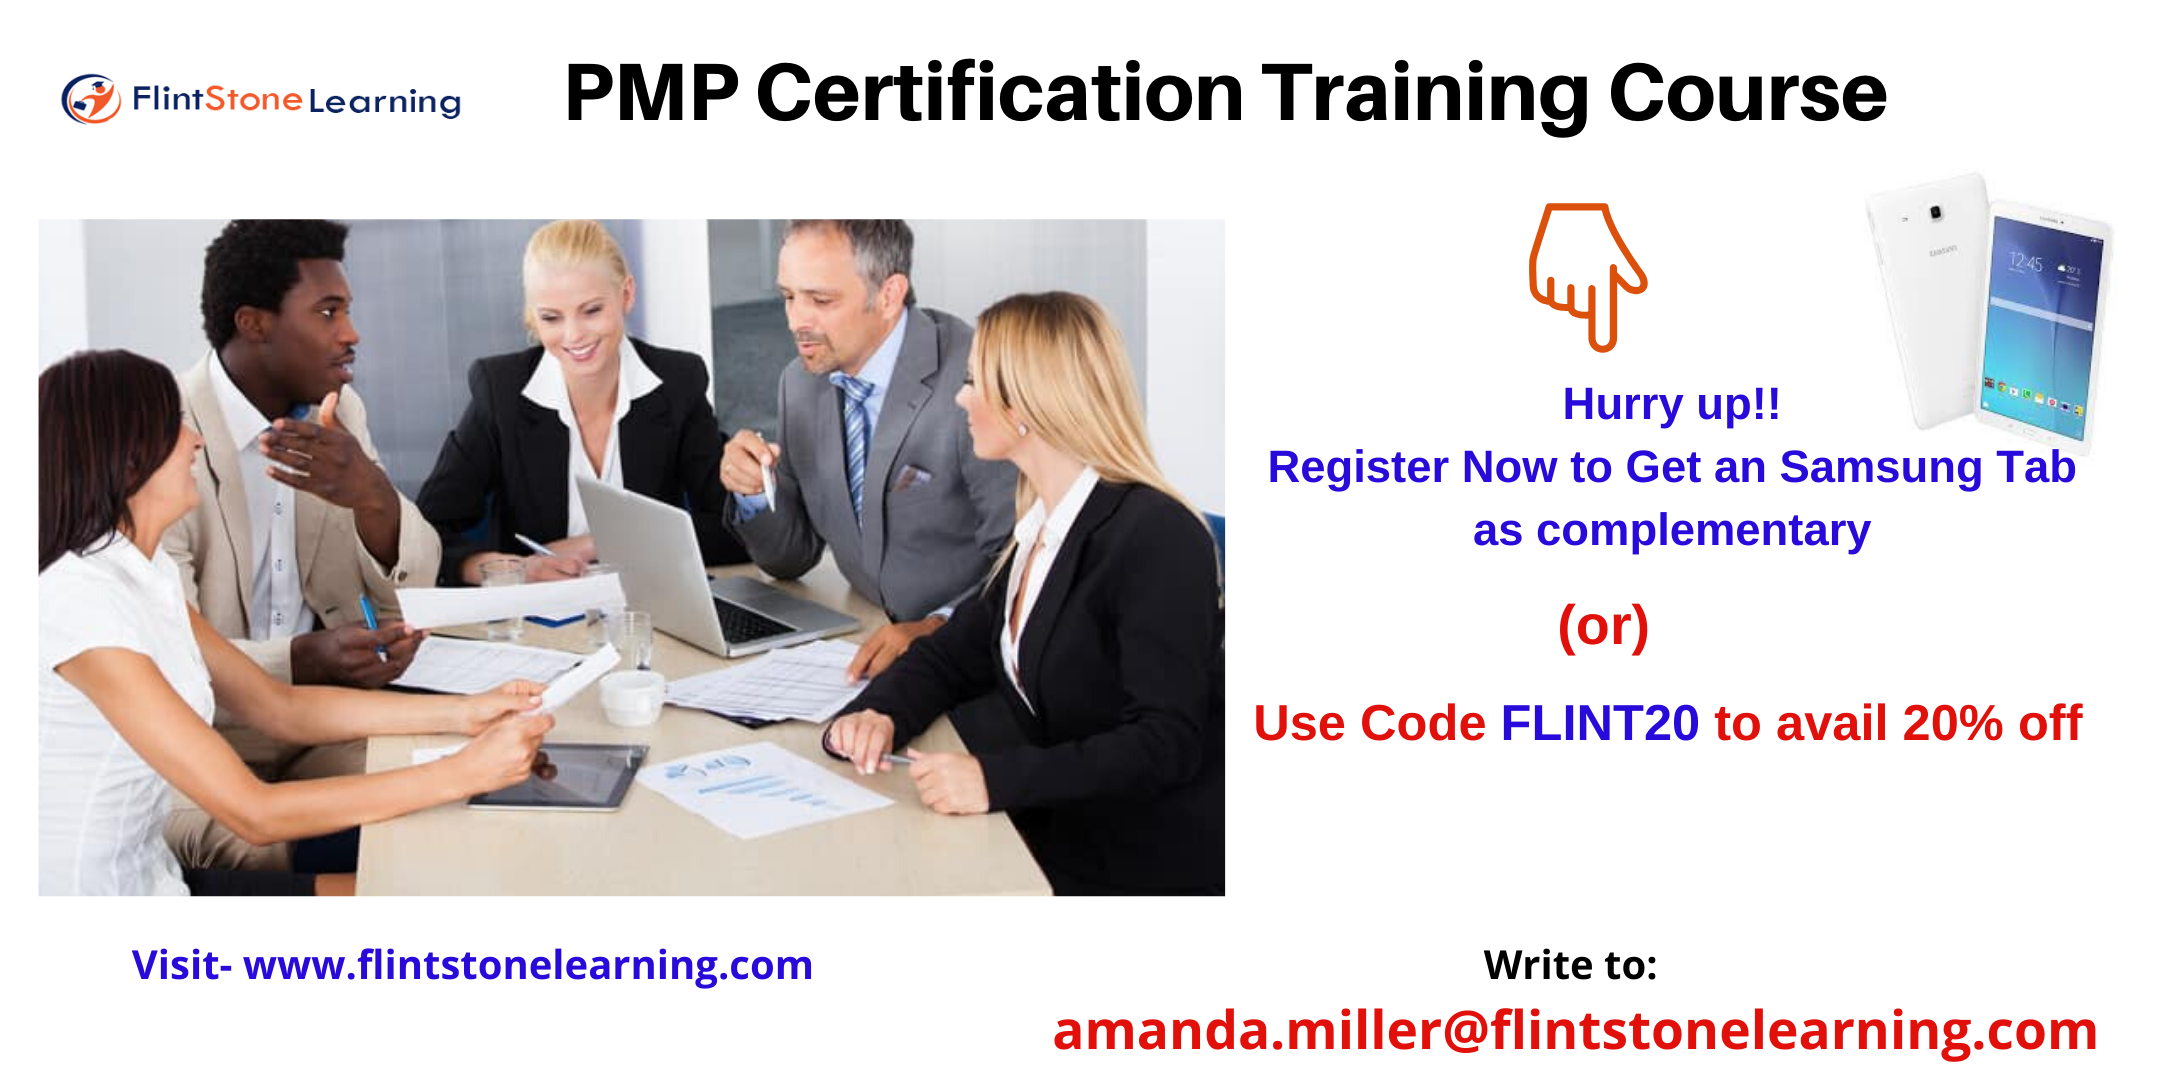 PMP Training workshop in Clearwater, FL